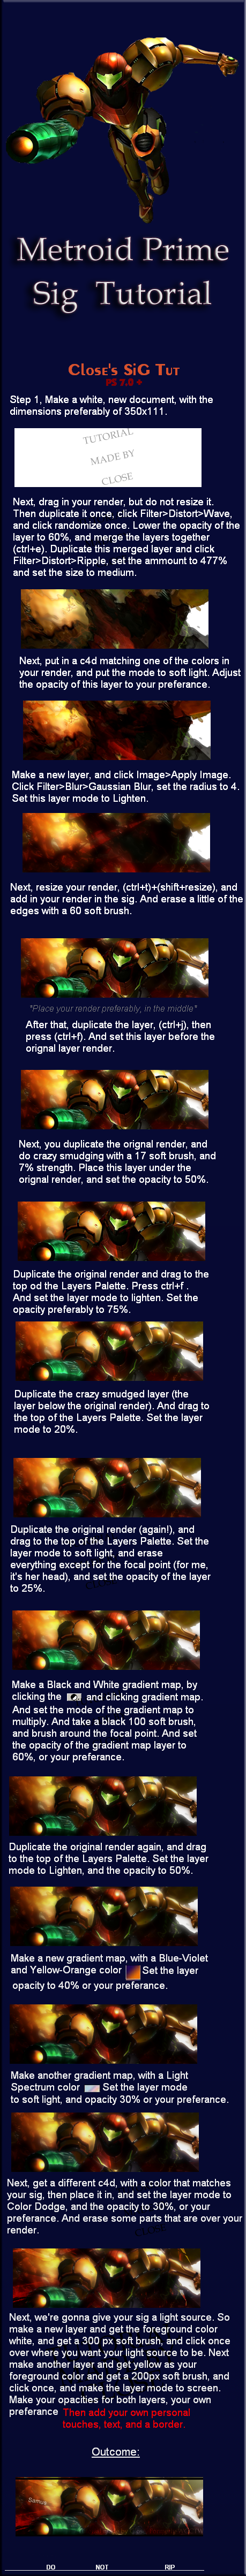 Metroid_Prime_Sig_Tut_by_tonyhawkcheater.png